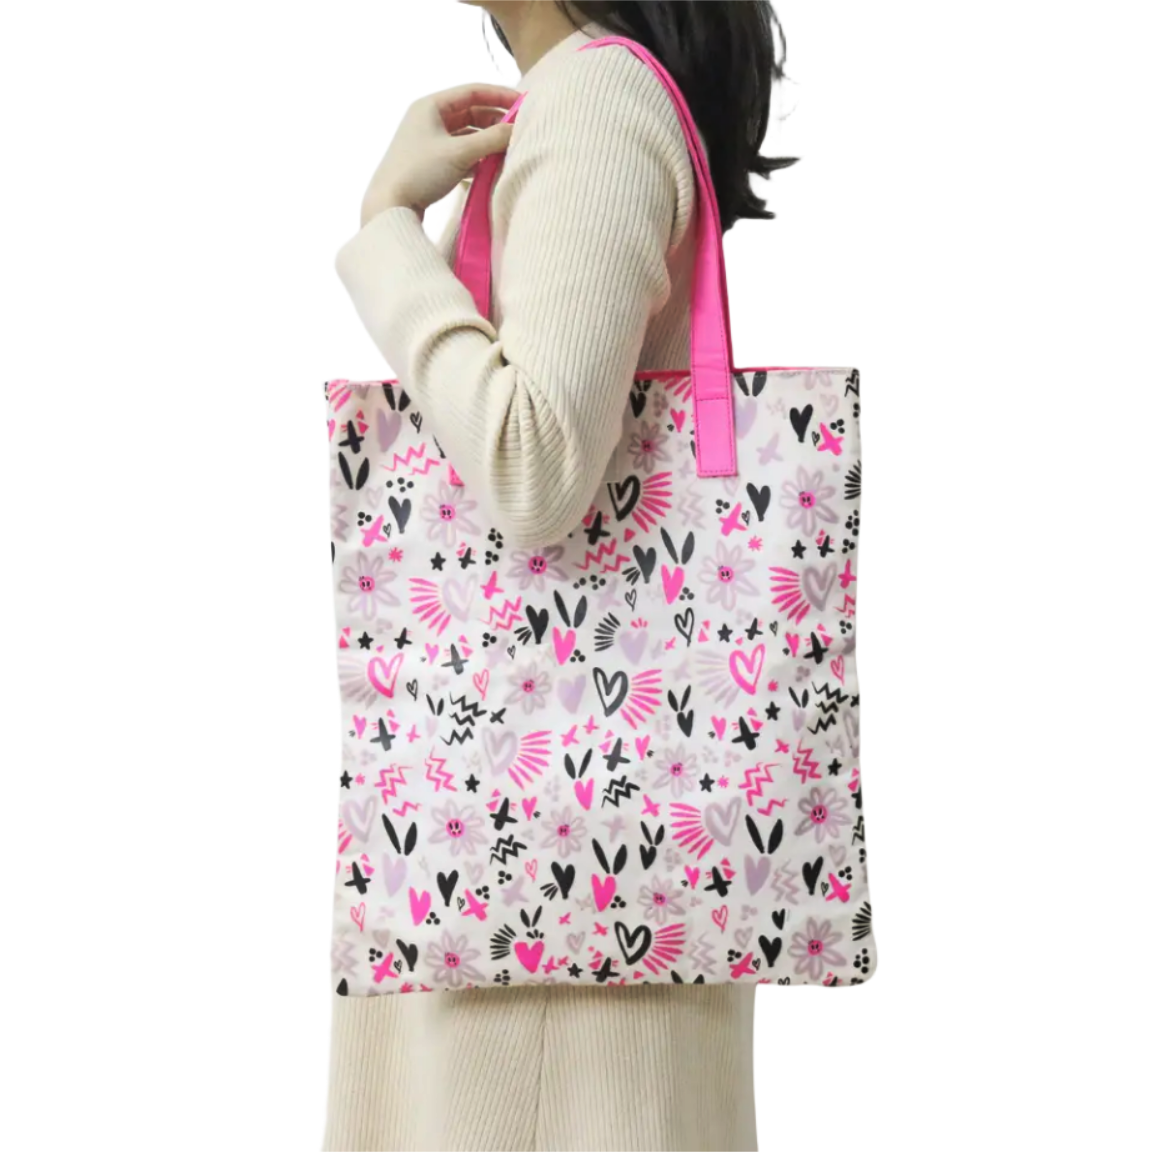 Popular Floral Pattern Hot Pink Cotton Tote Eco-friendly Canvas Shopping Bag